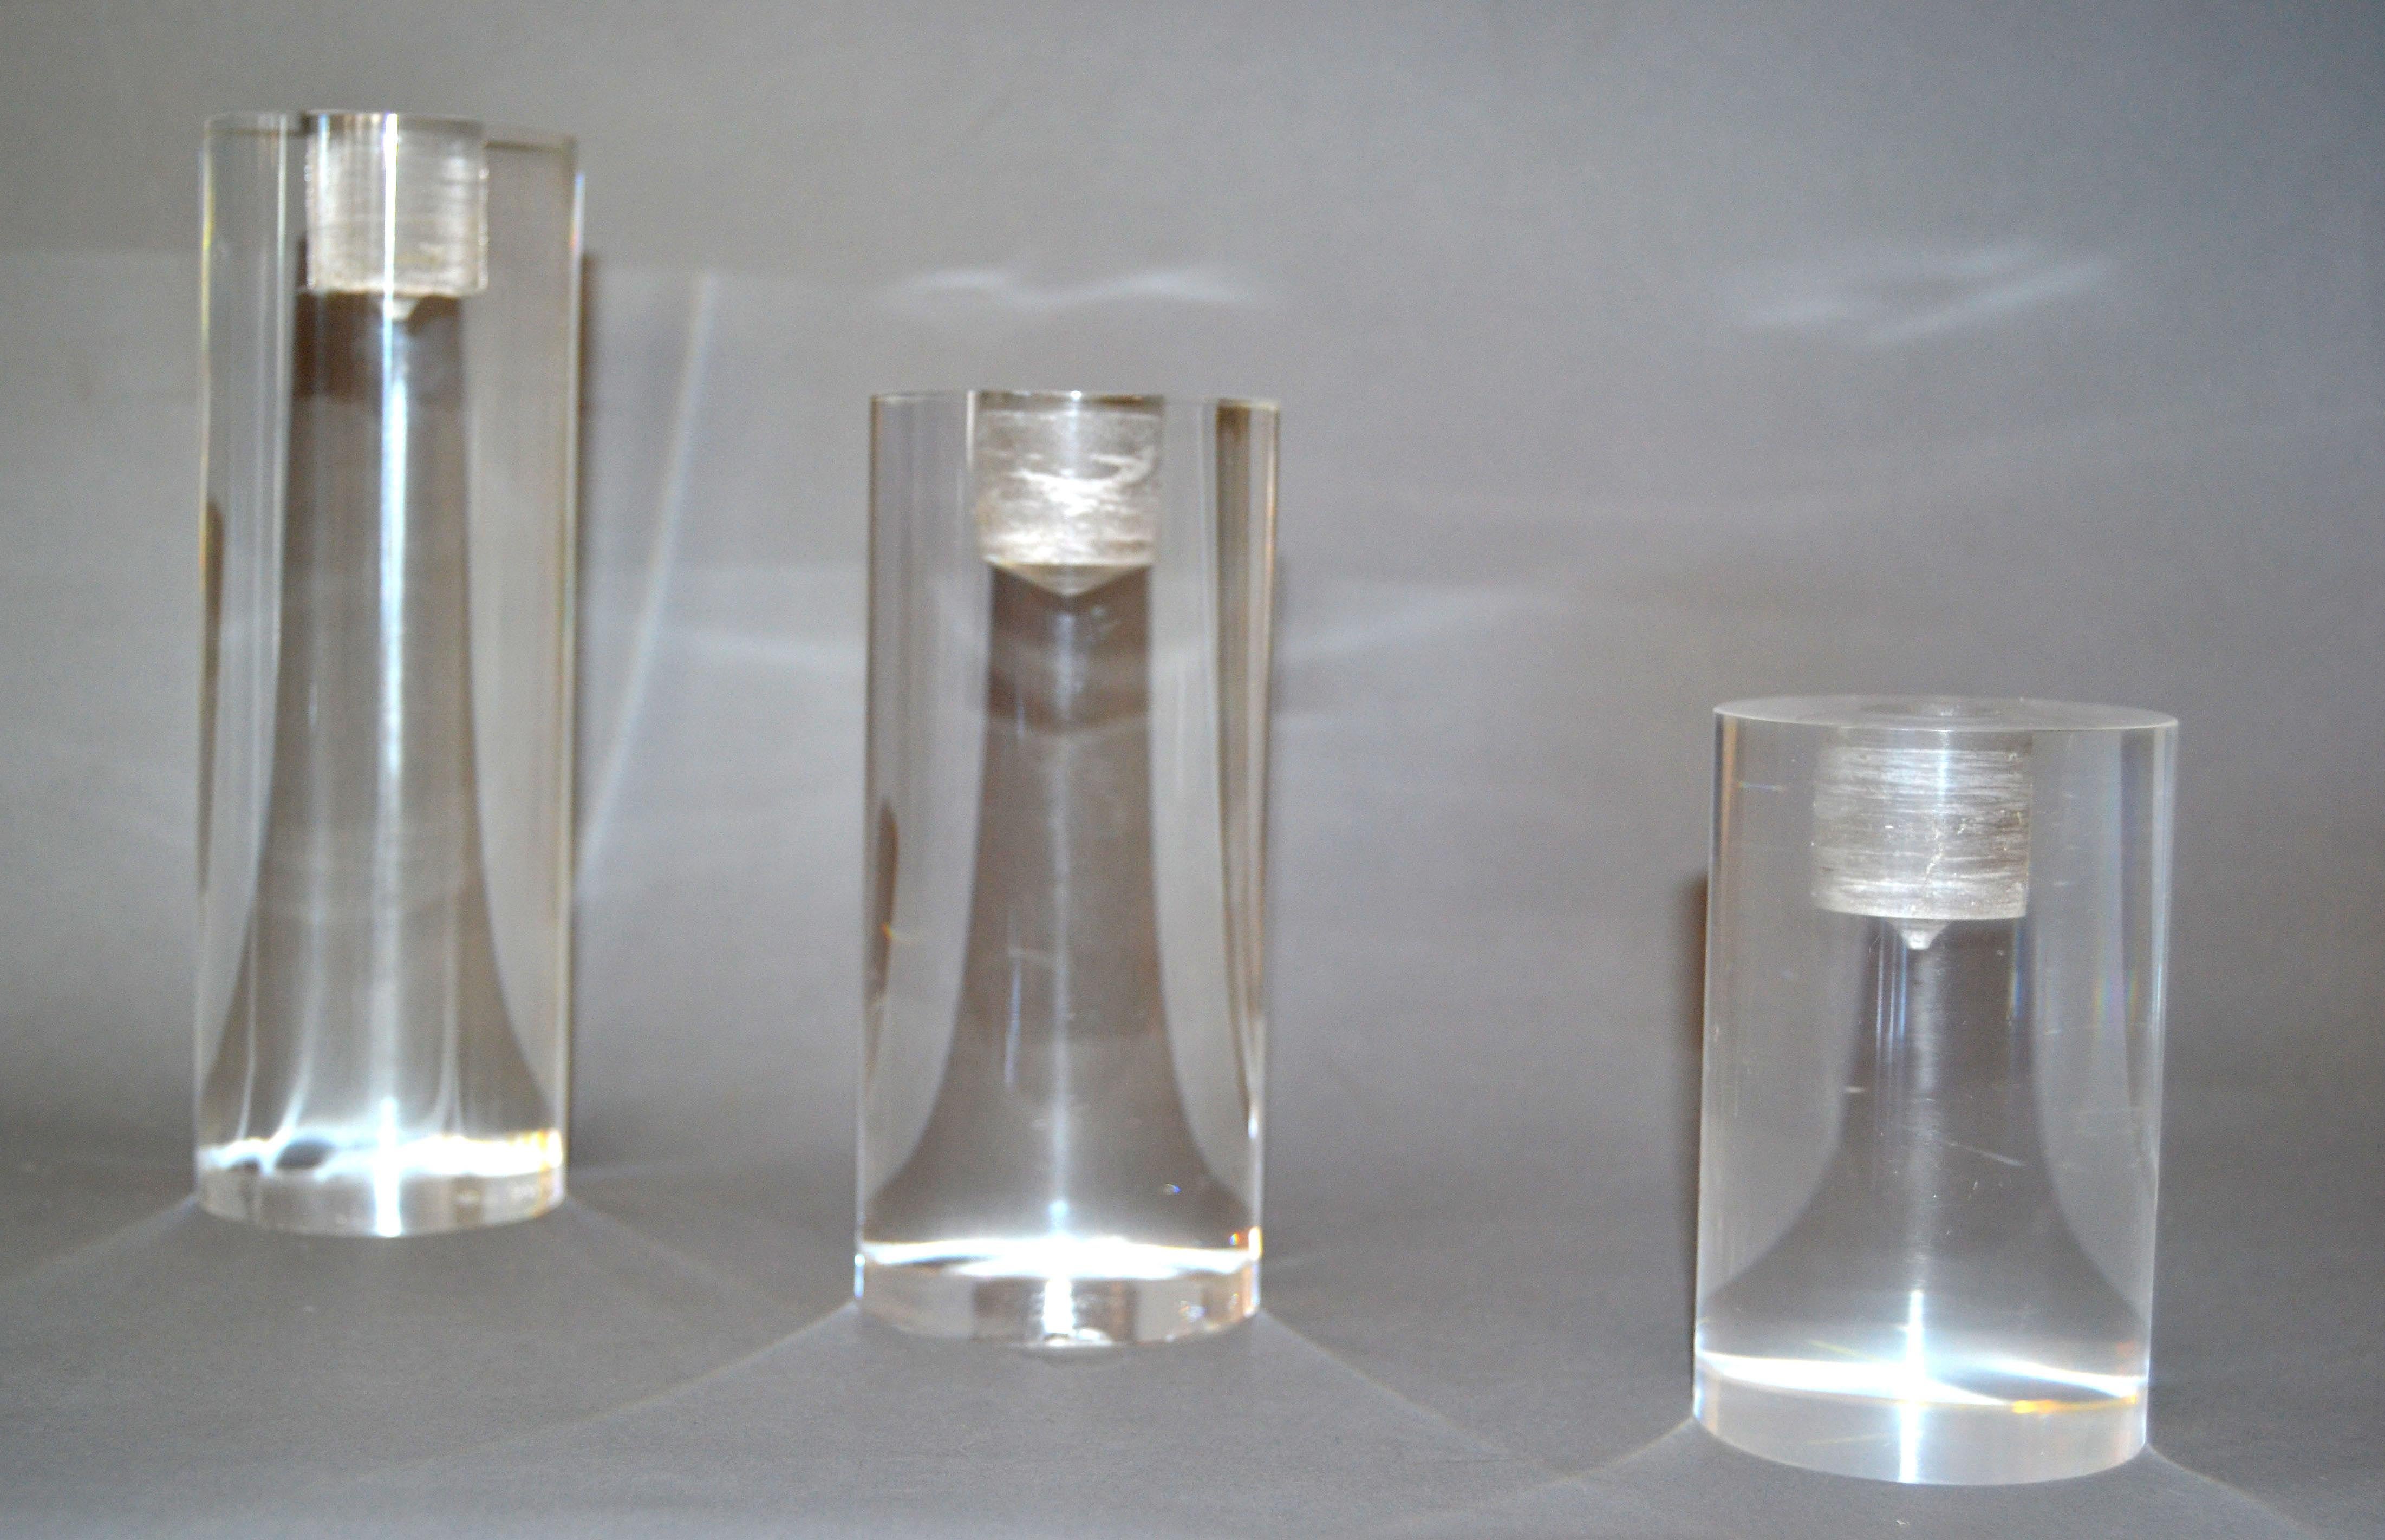 Set of three Mid-Century Modern Lucite candleholders in graduated sizes.
Large, 7.38 inches height x 2.5 inches diameter.
Medium, 5.63 inches height x 2.5 inches diameter.
Small, 4.00 inches height x 2.5 inches diameter.
Designed to fit any